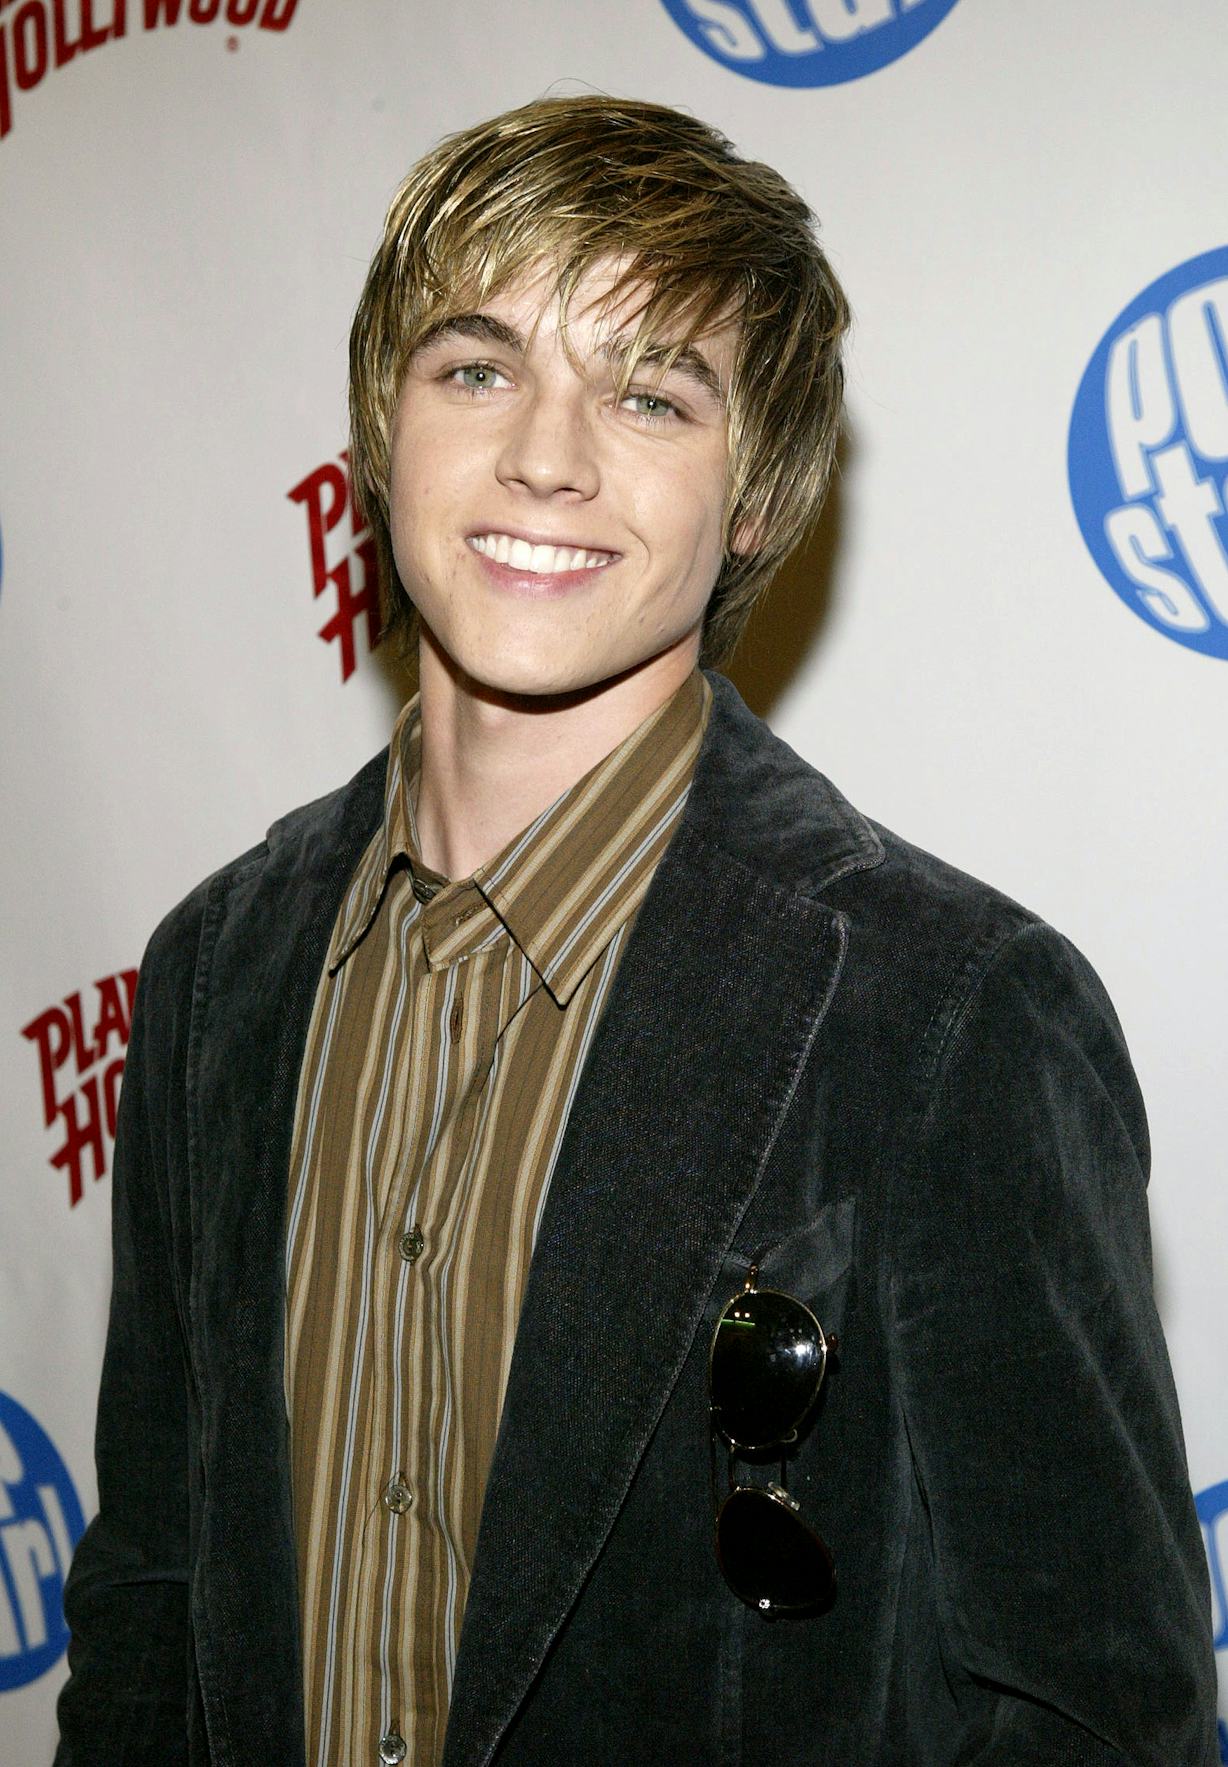 What Is Jesse McCartney Up To? You Know You’re Curious About Him & His